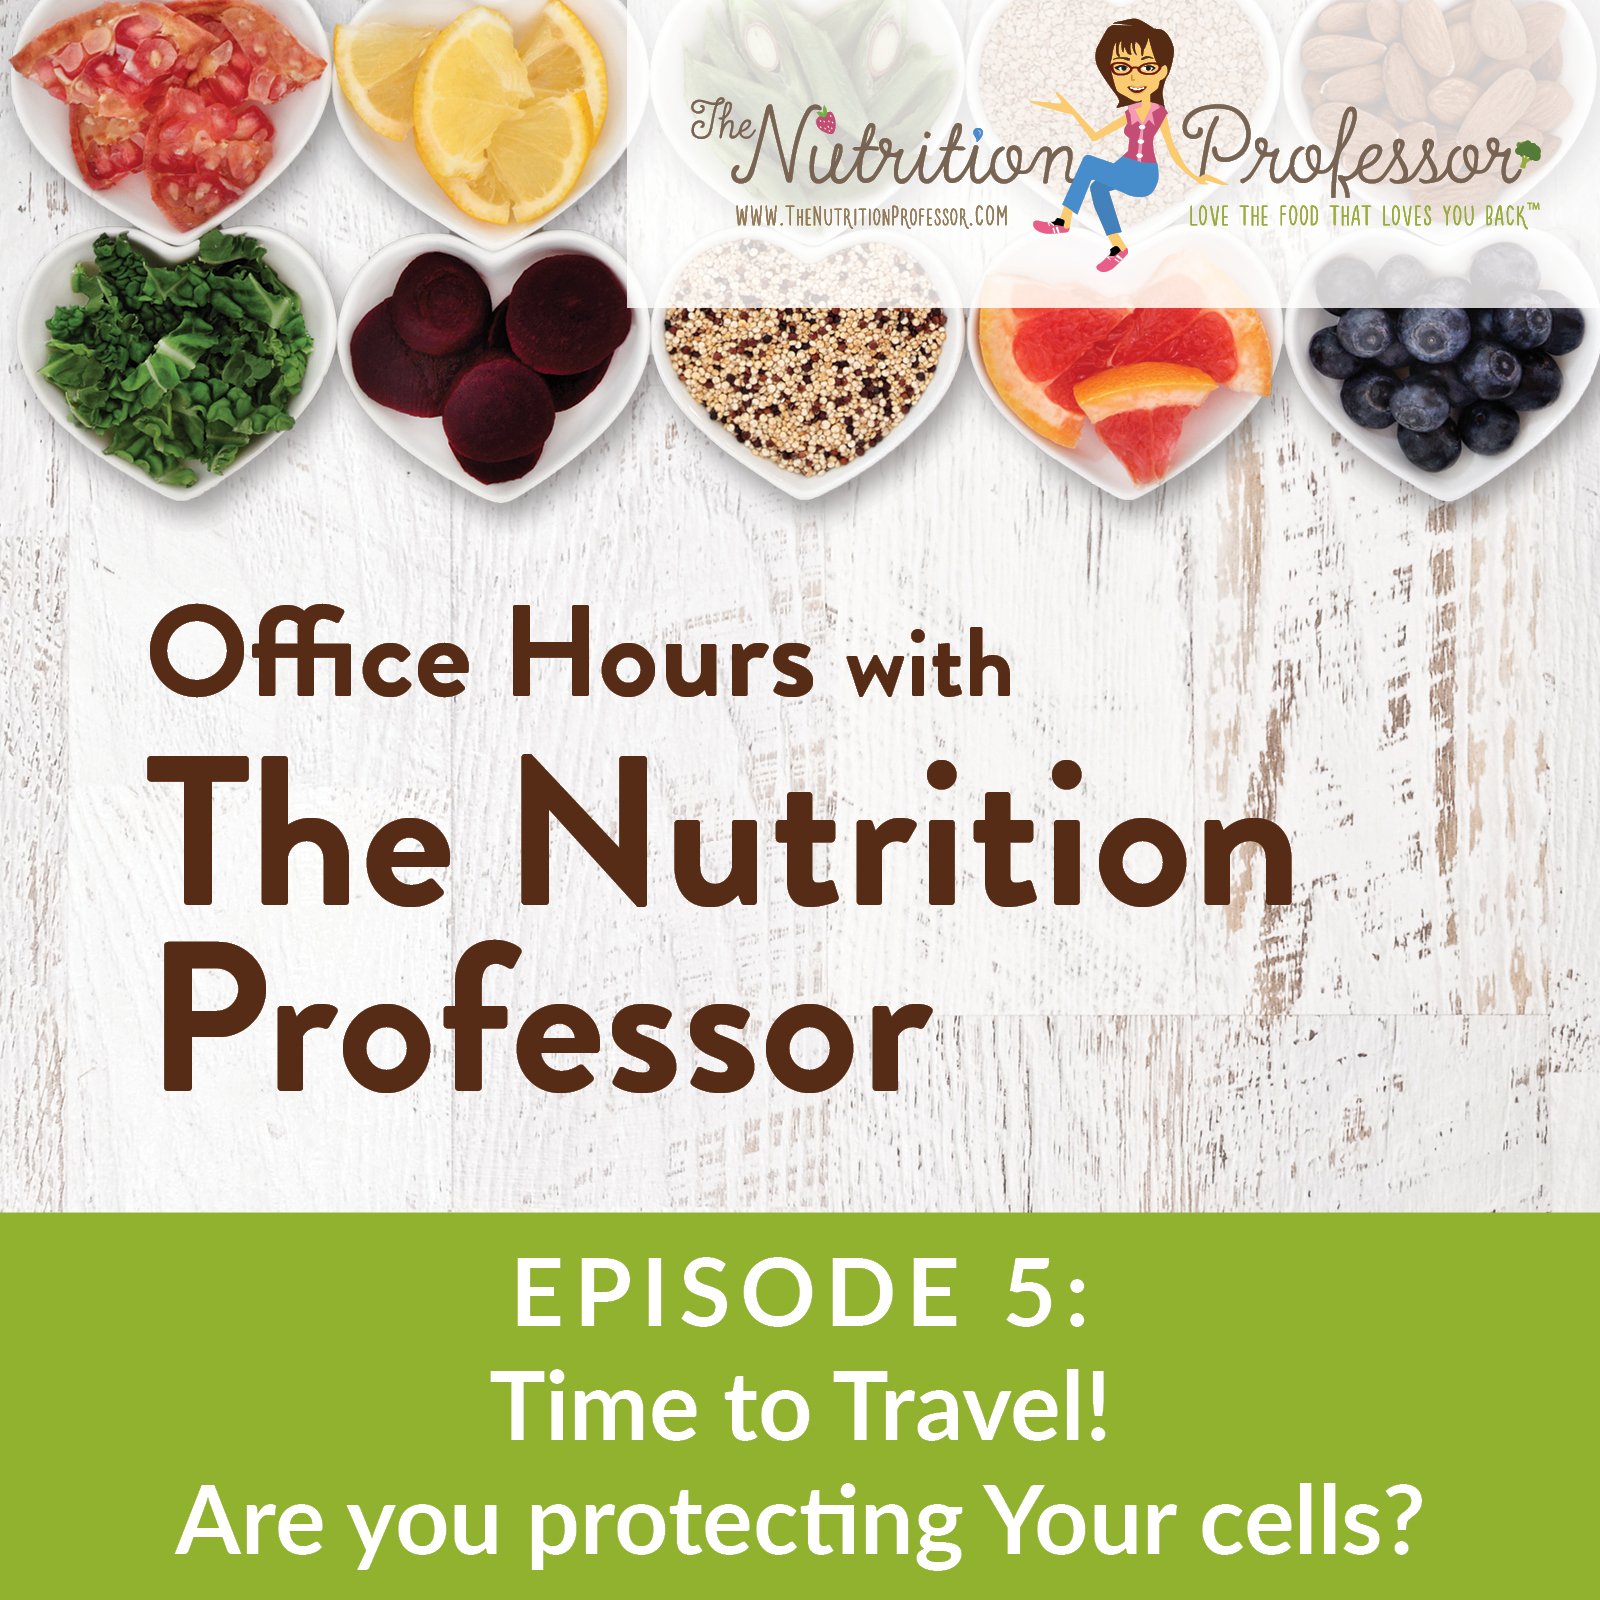 Podcast Episode 5: Time to Travel! Are you protecting your cells?